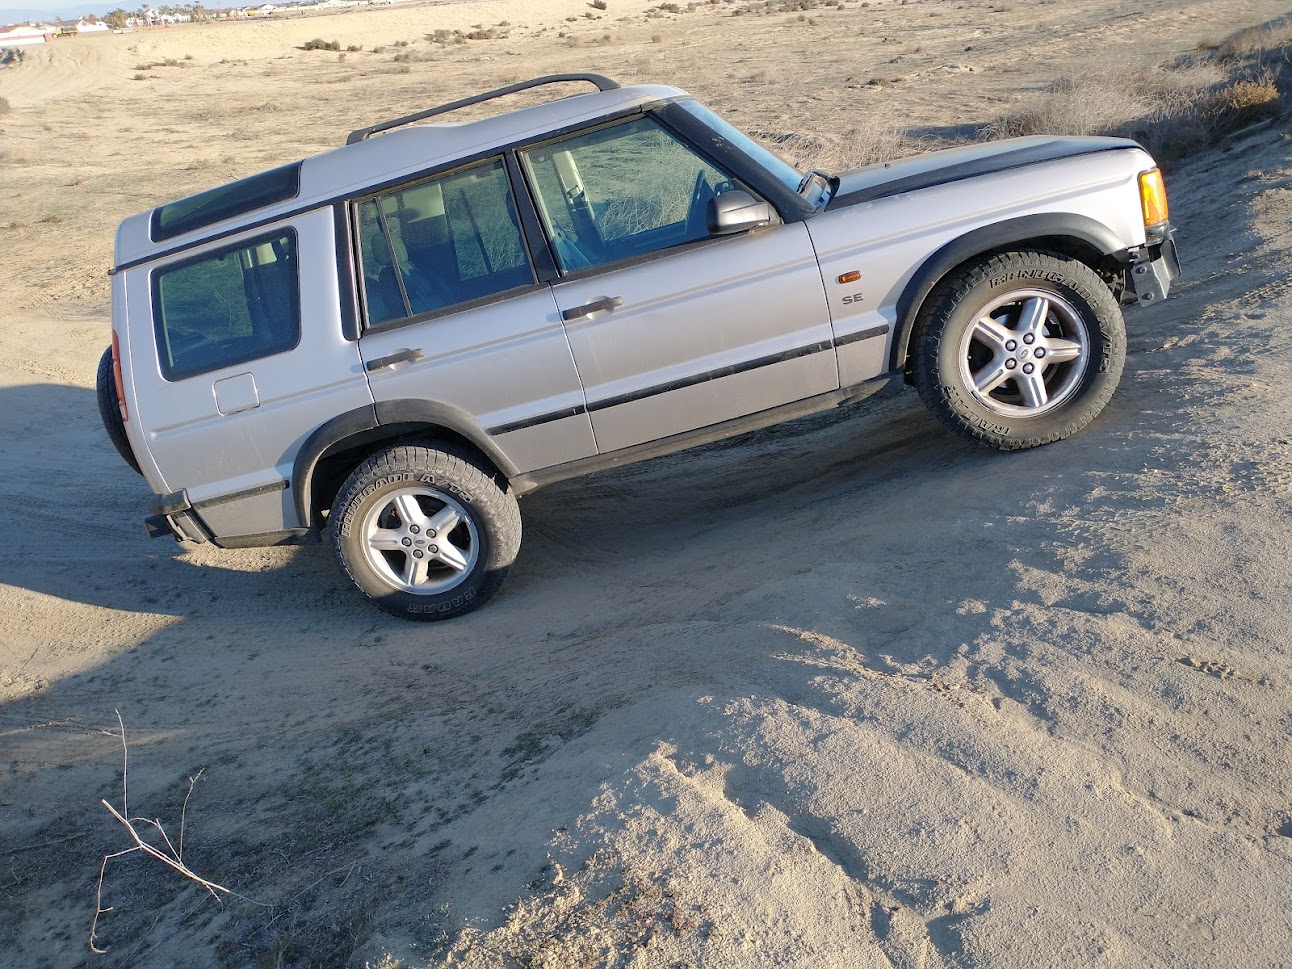 Overland Classifieds :: 2001 Land Rover Discovery II - Expedition Portal